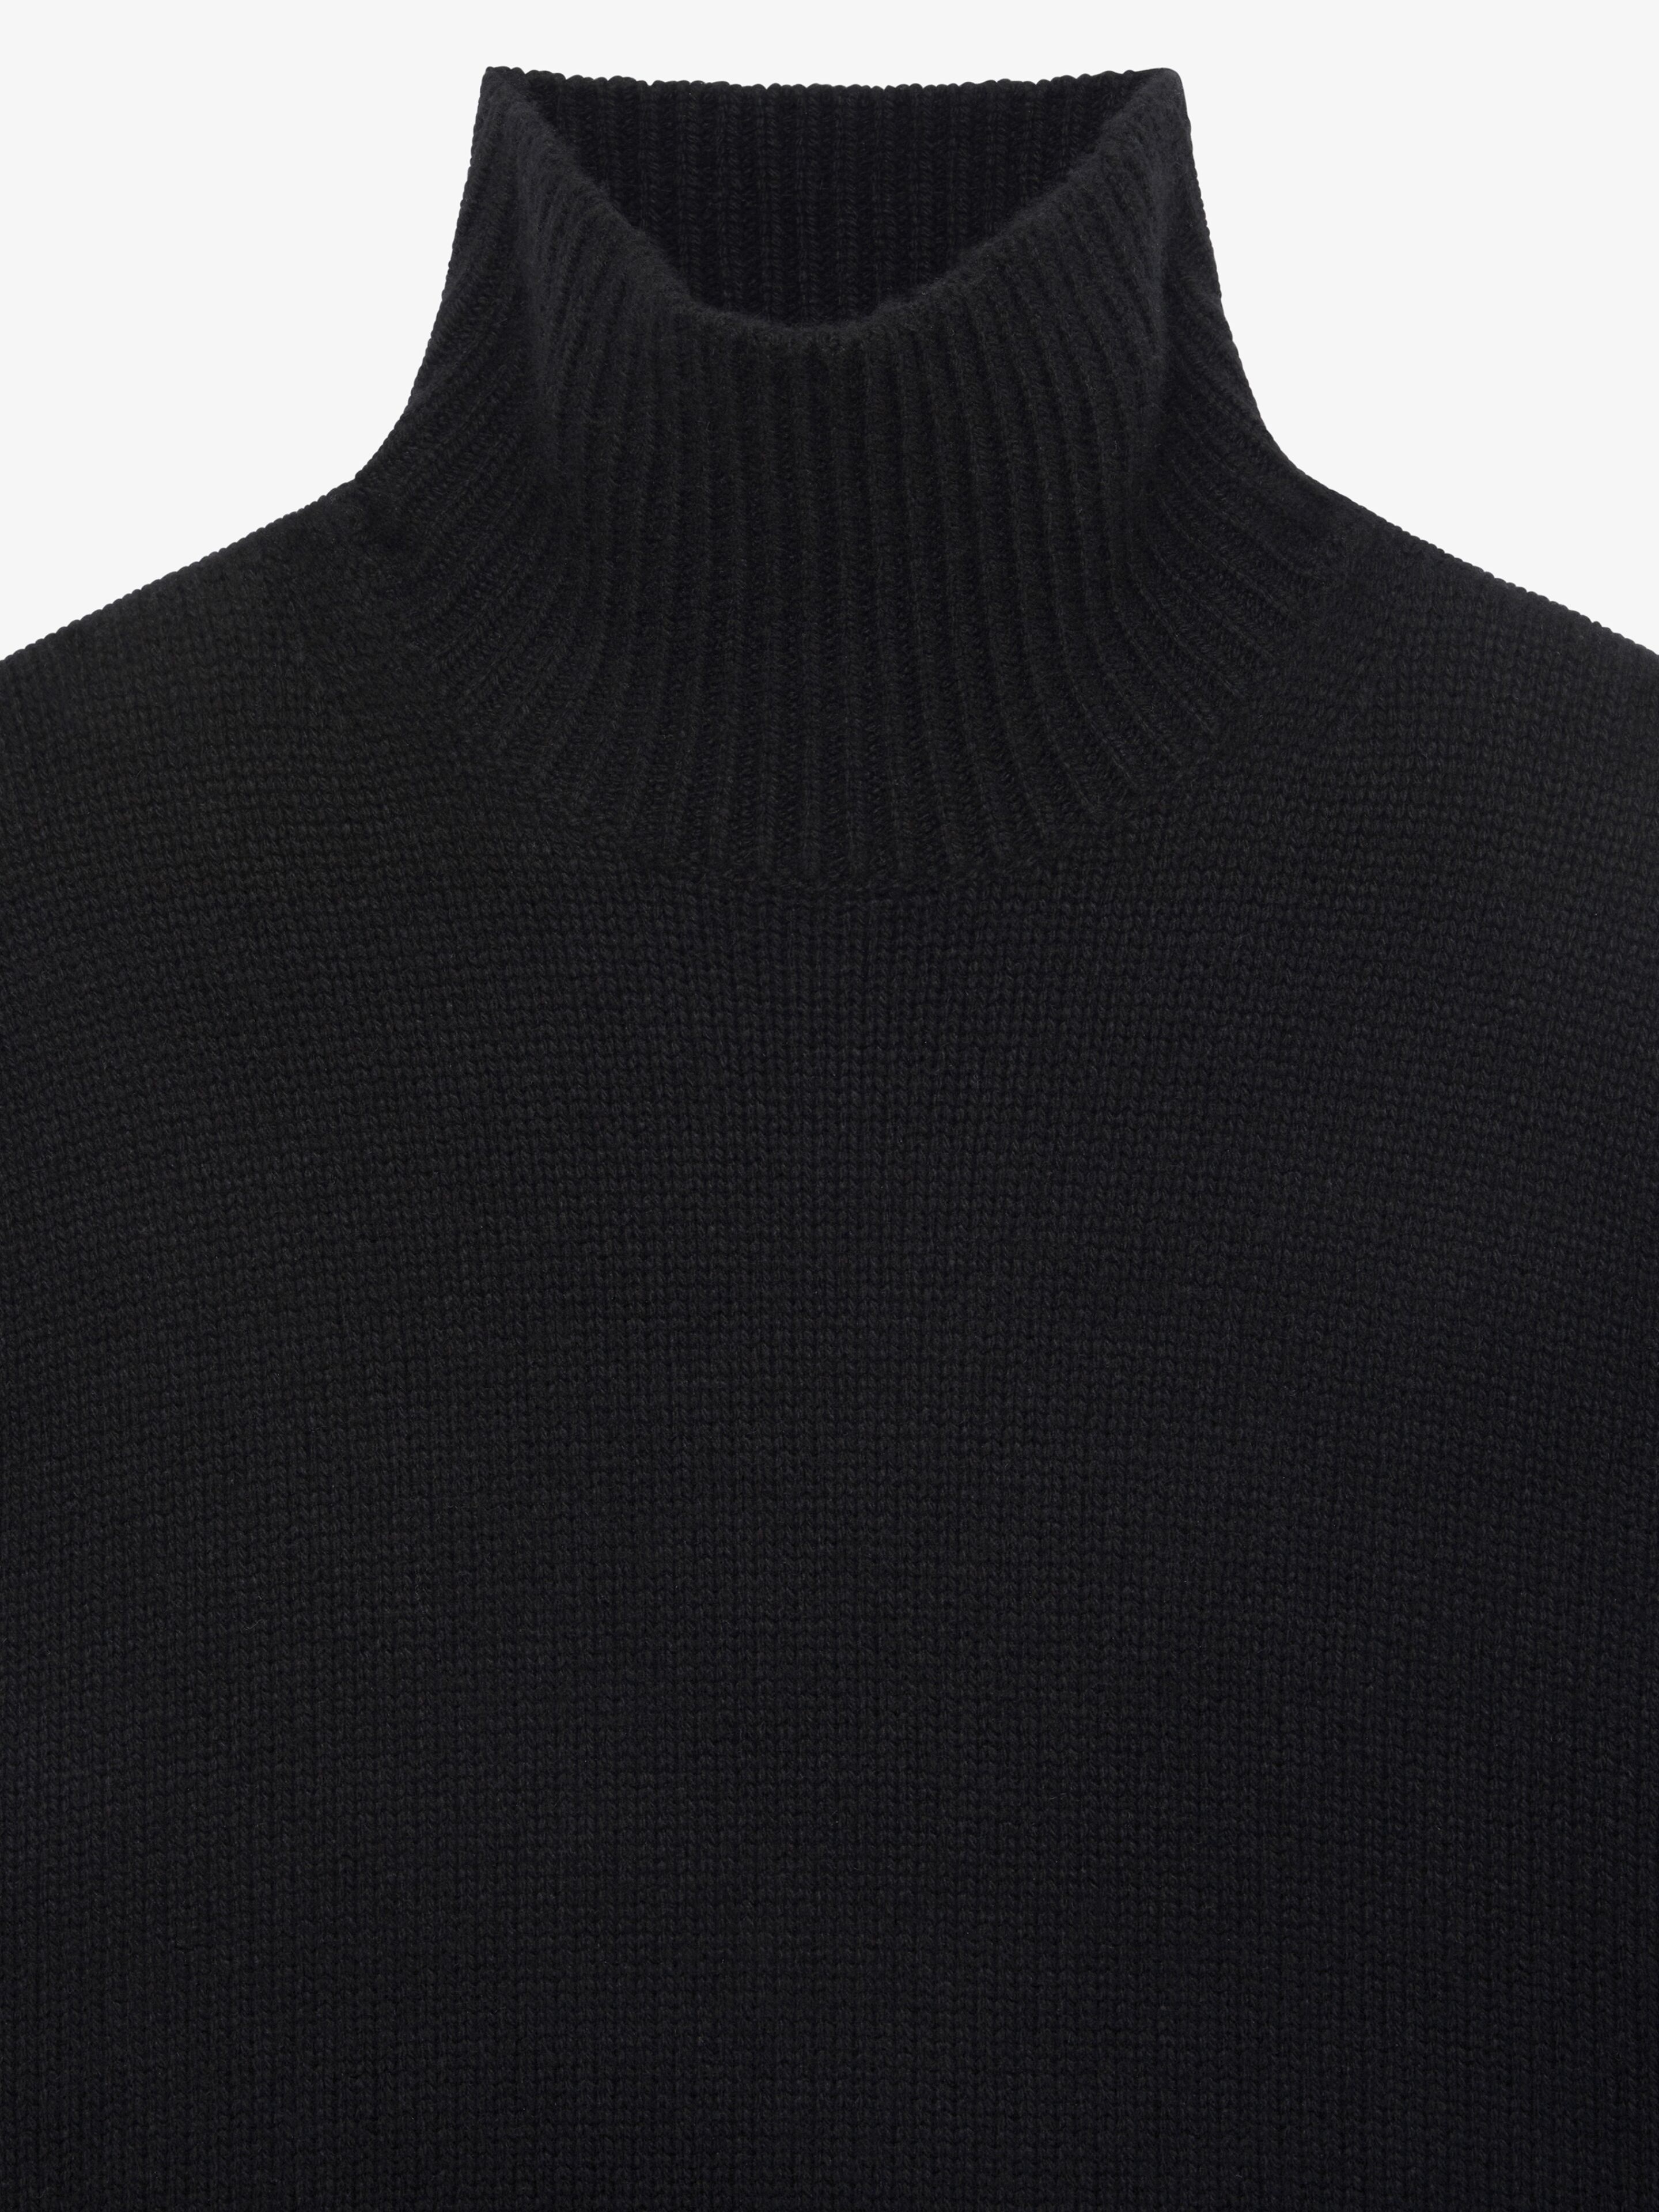 TURTLENECK SWEATER IN CASHMERE - 5